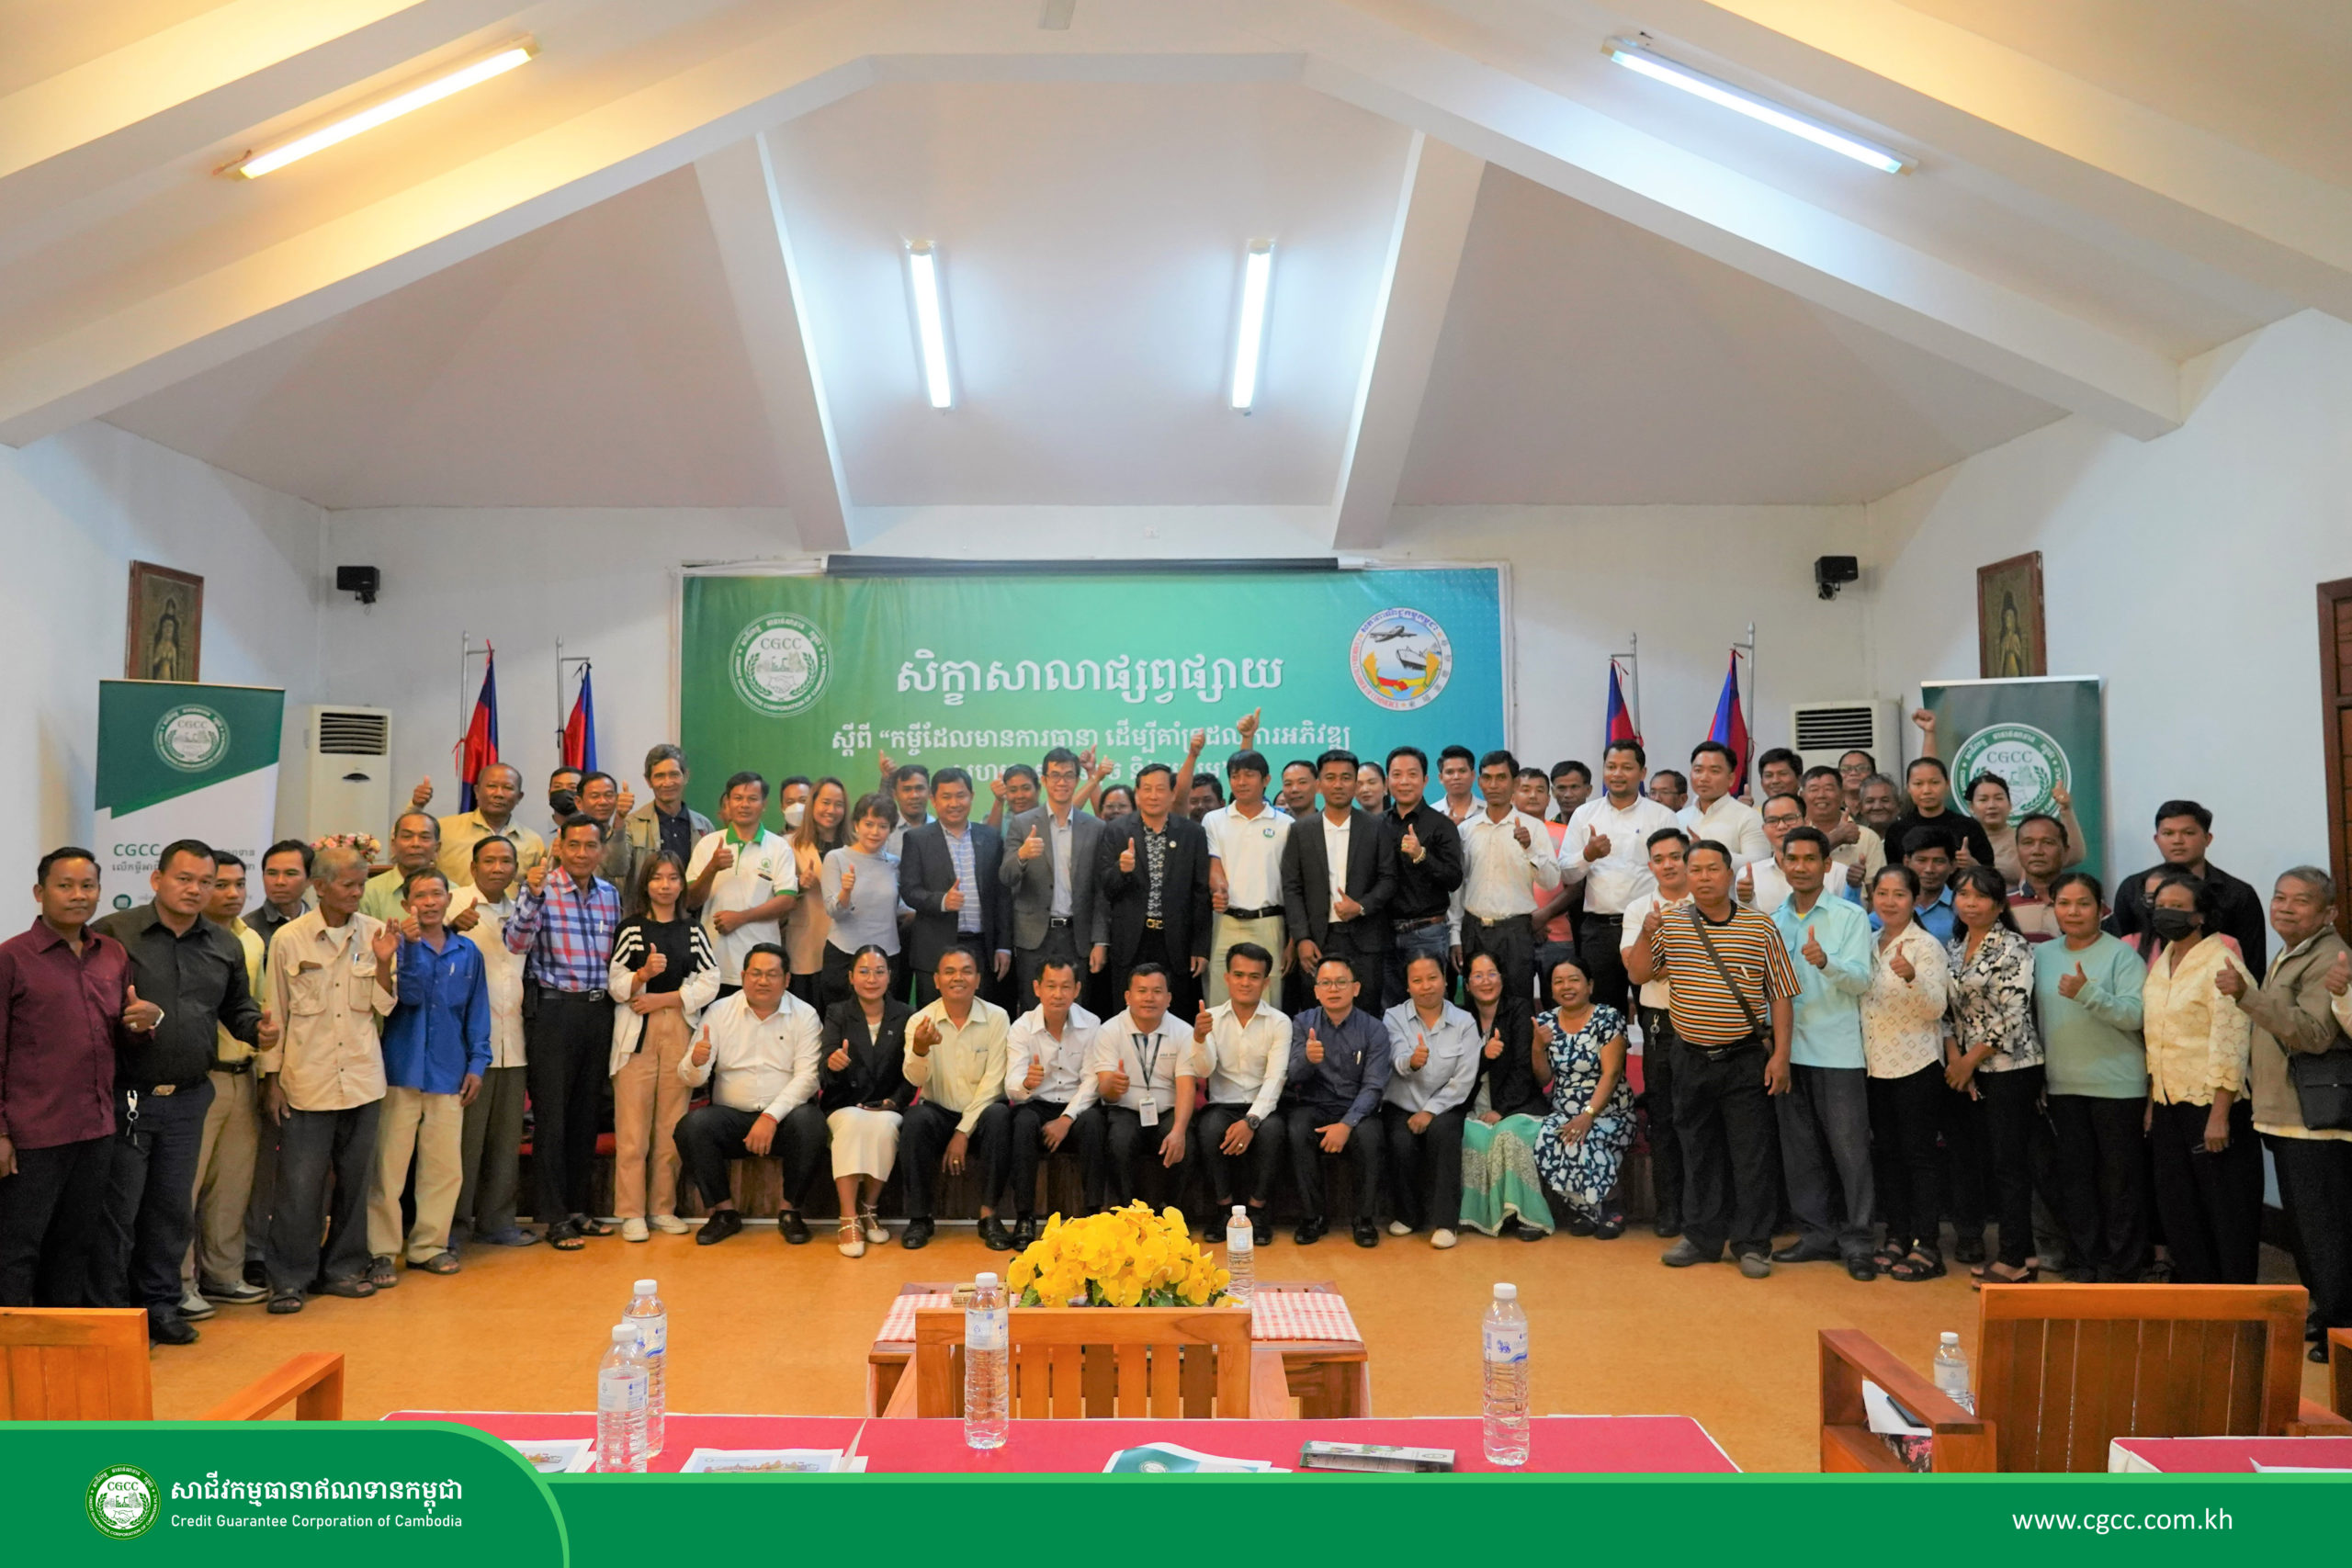 Dissemination Seminar on “Guaranteed Loans to Support the Development of Small and Medium Enterprises” in Pailin Province